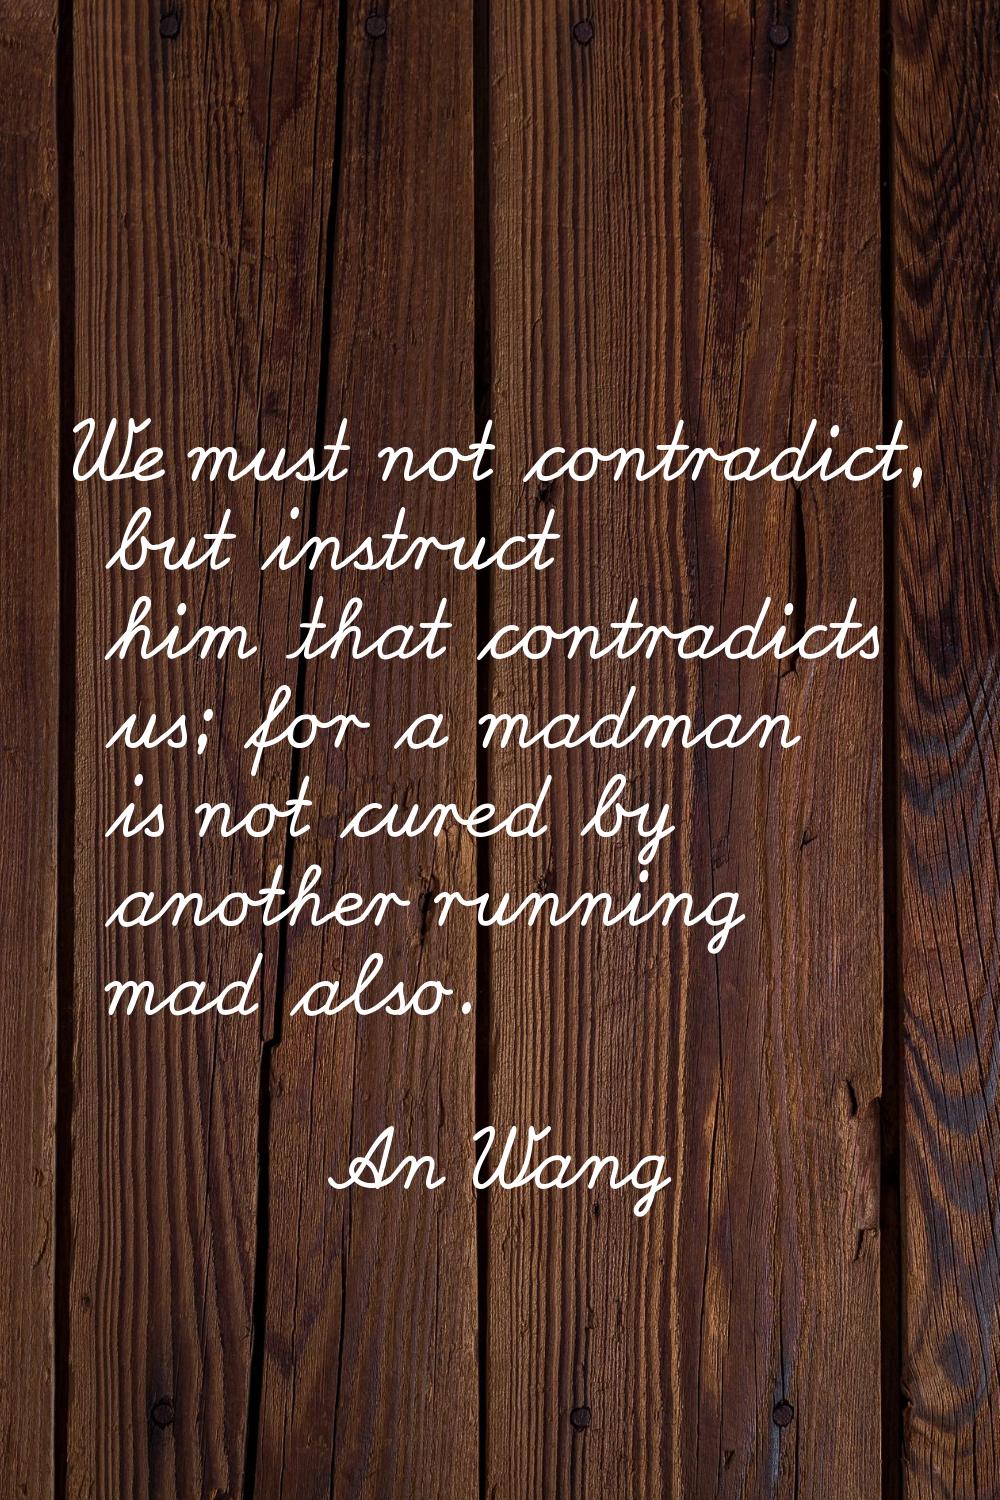 We must not contradict, but instruct him that contradicts us; for a madman is not cured by another 